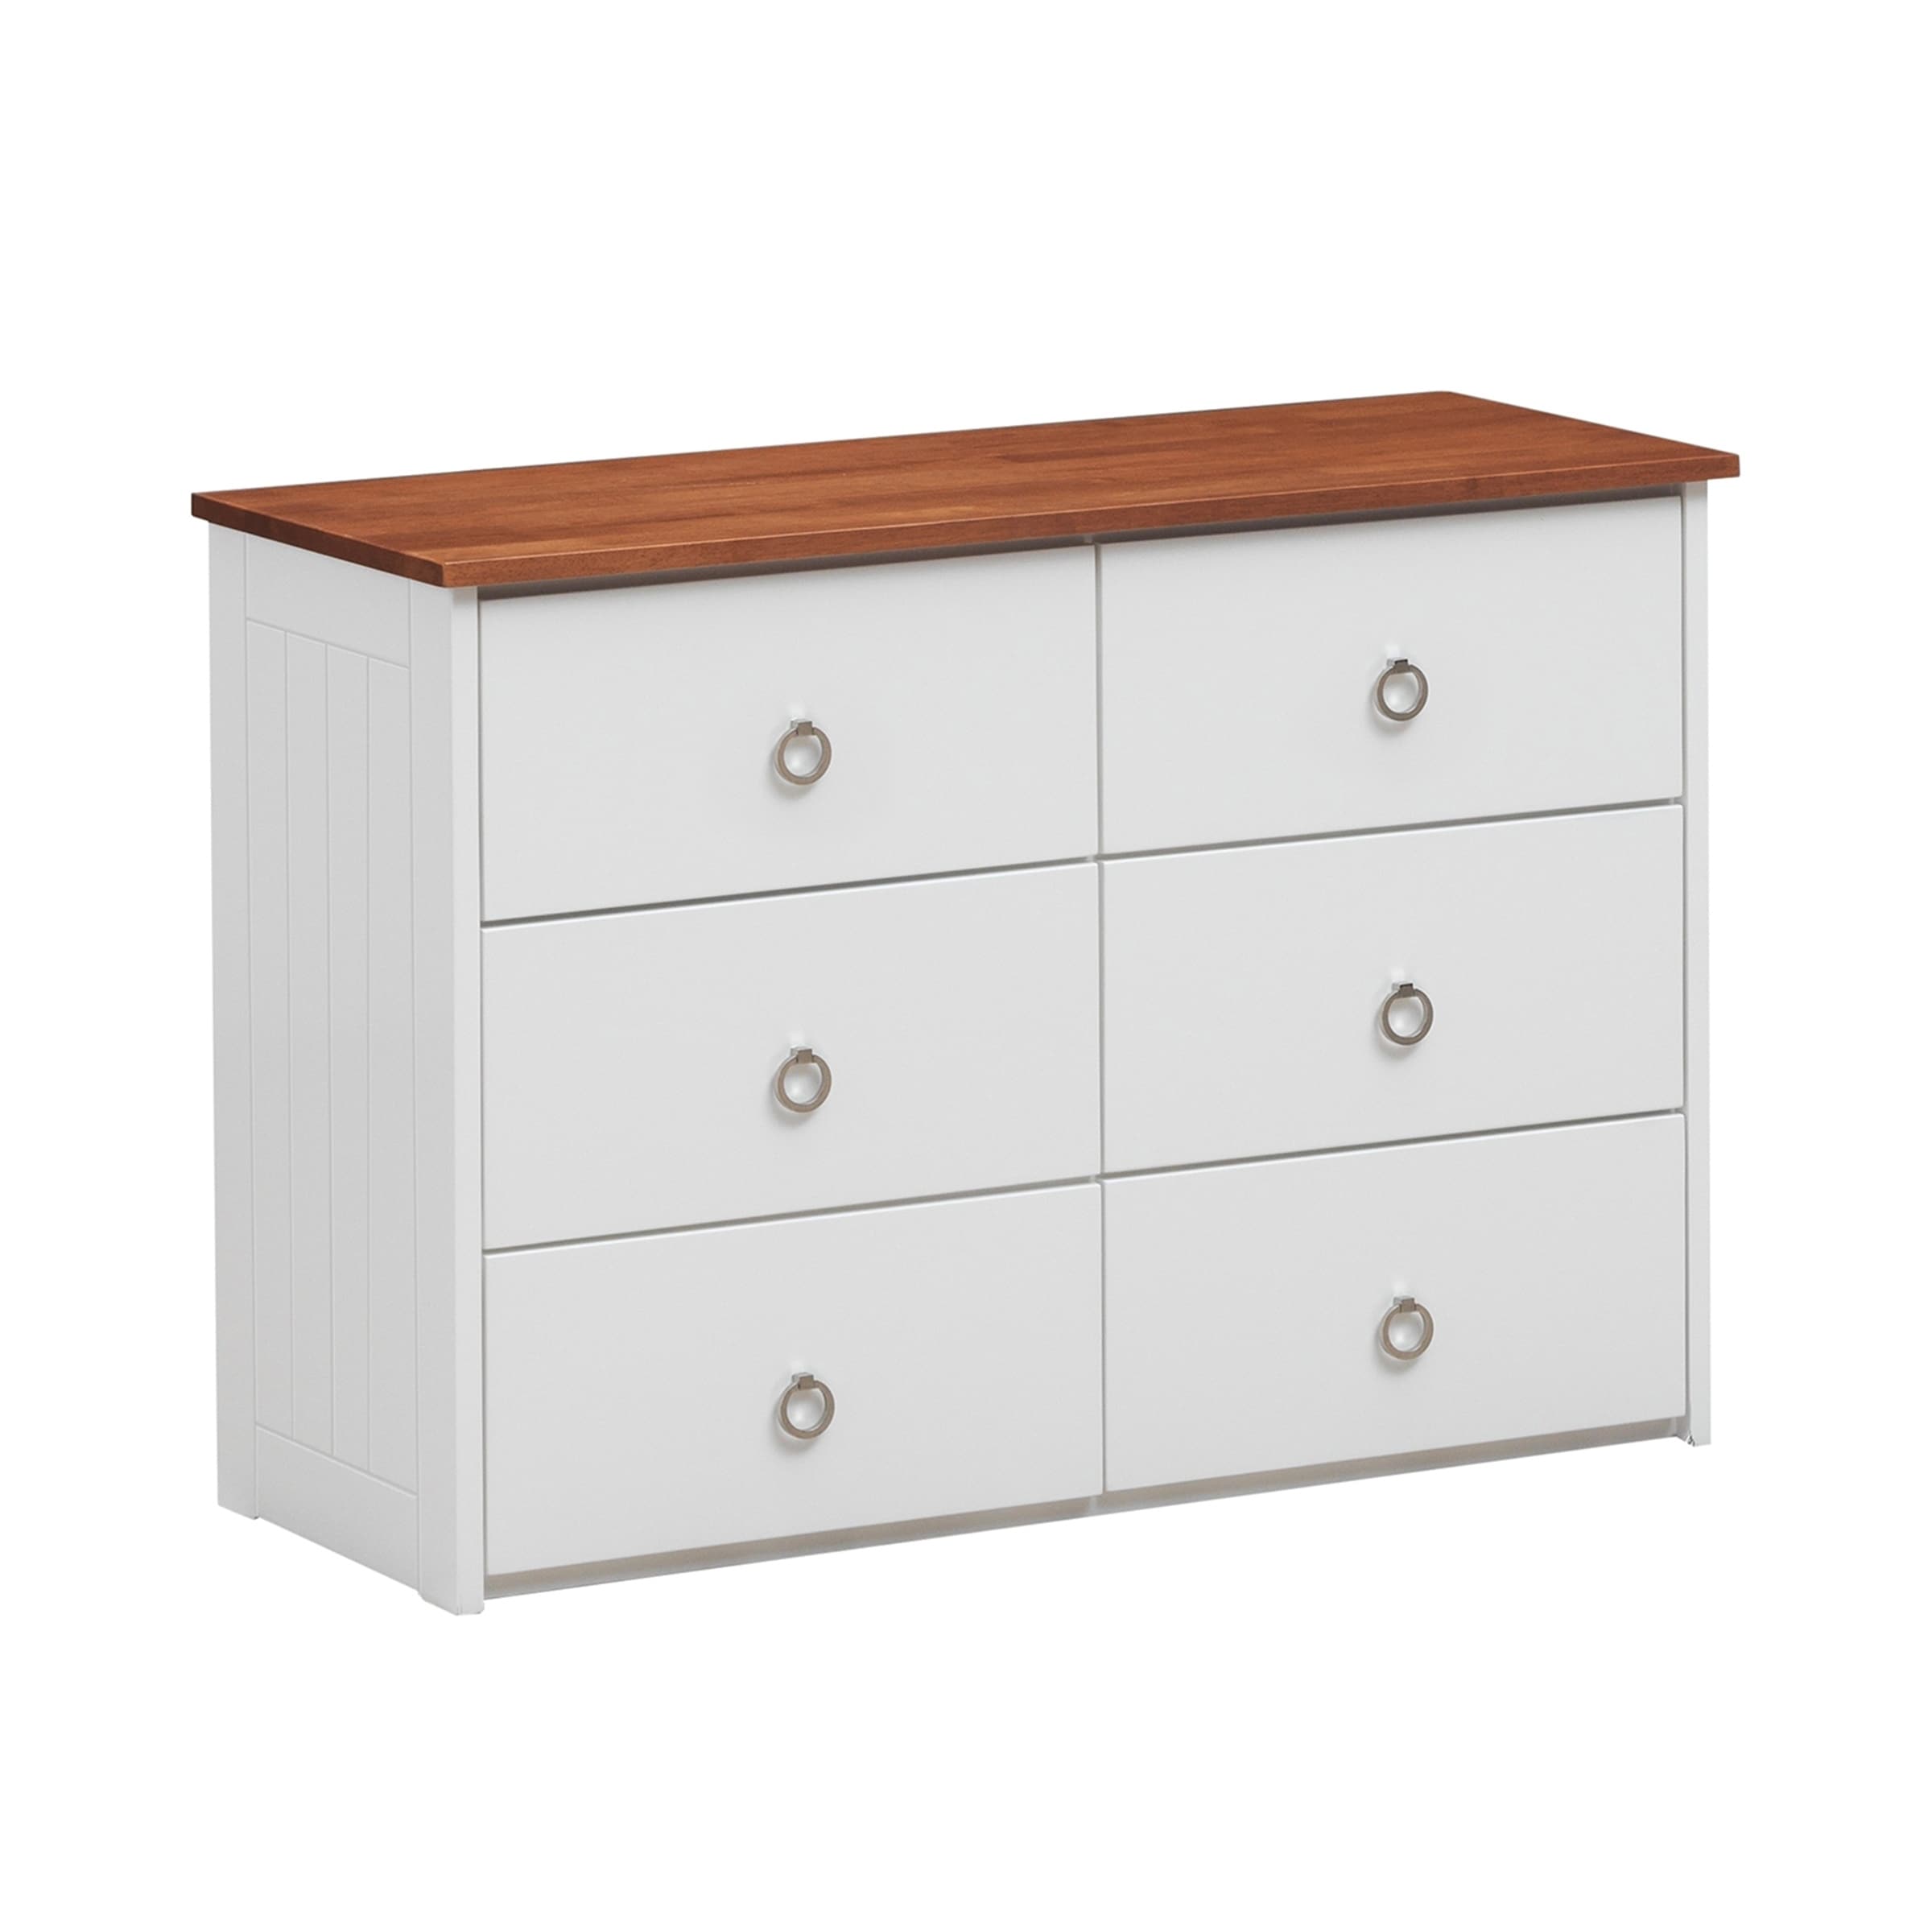 Shop Nautical Style 6 Drawer Wooden Dresser With Ring Pulls Brown